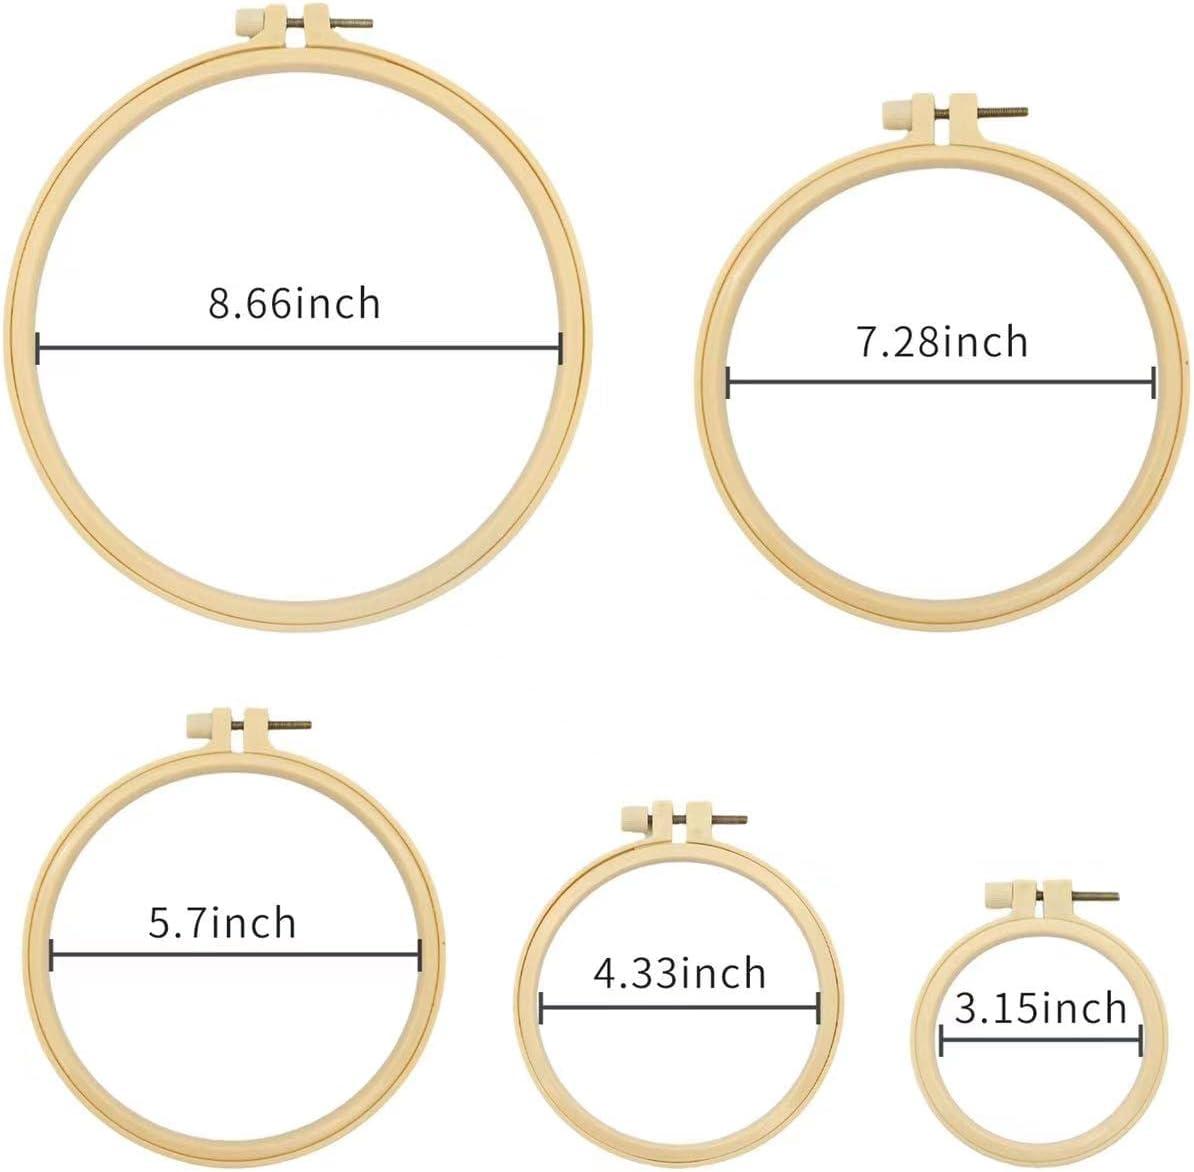 VITKSTAR Embroidery Hoop 5pieces 3 inch to 8 inch Plastic Embroidery Hoop  Set Circle Cross Stitch Hoop for Embroidery and Cross Stitch (Multicolour)  (Multicolour) (Light Yellow)